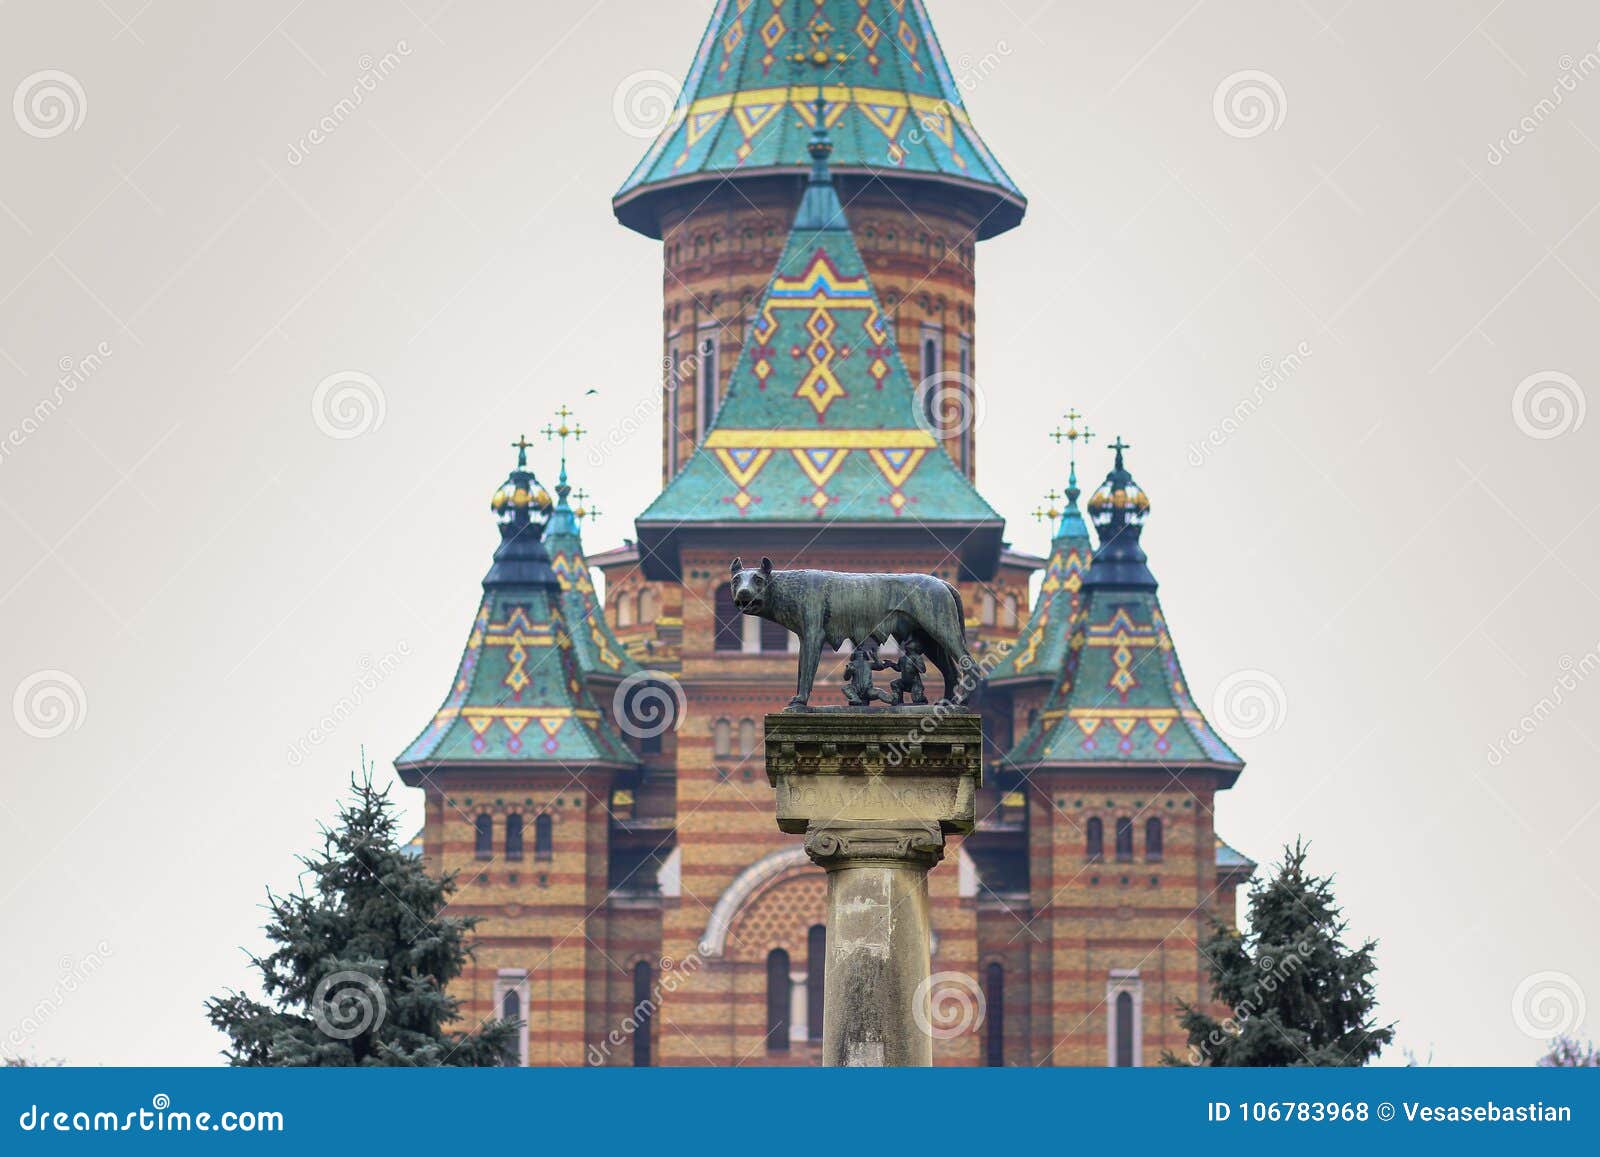 the statue lupa capitolina with the orthodox metropolitan cathedral in the background in timisoara